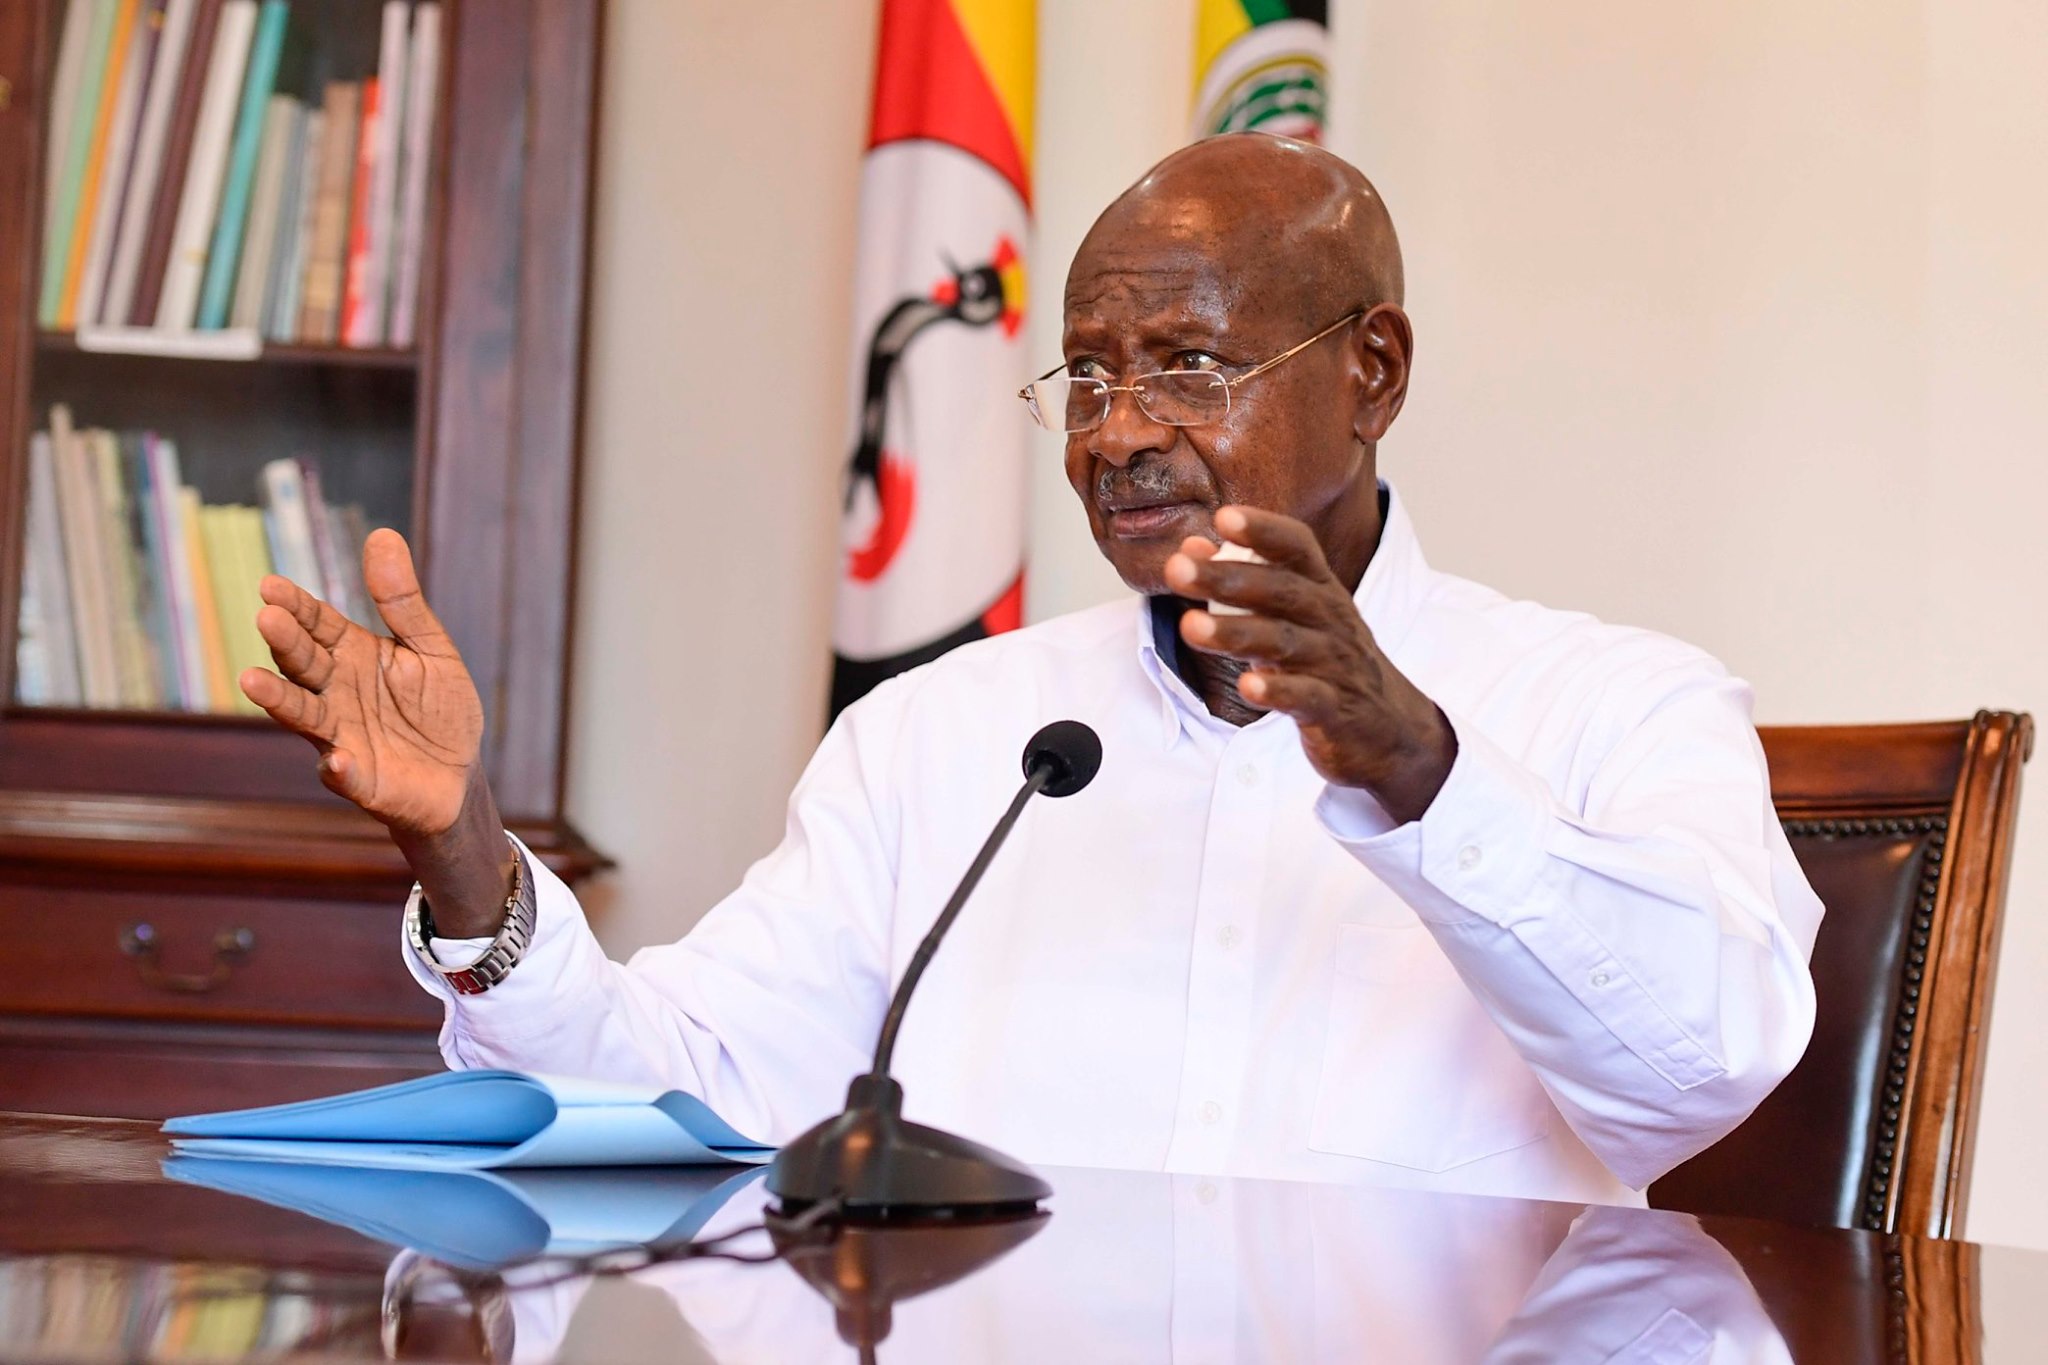 President Museveni Speaks Out on Why He Disagreed with WHO